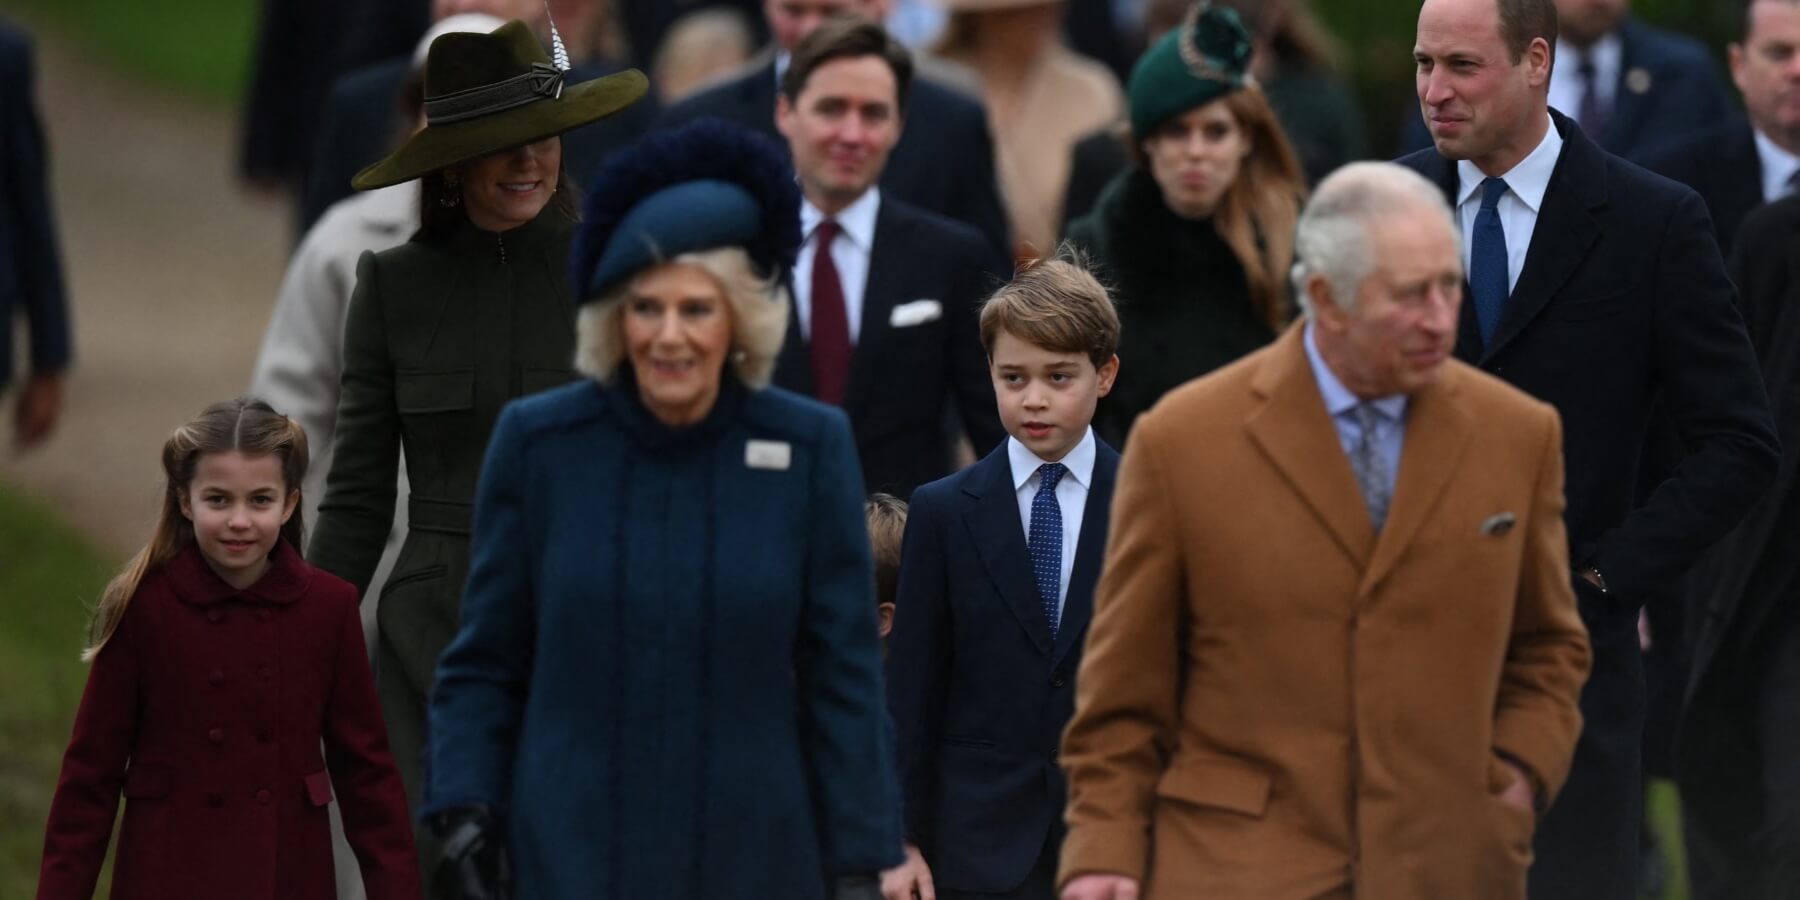 The royal family walks to Christmas services in 2022.